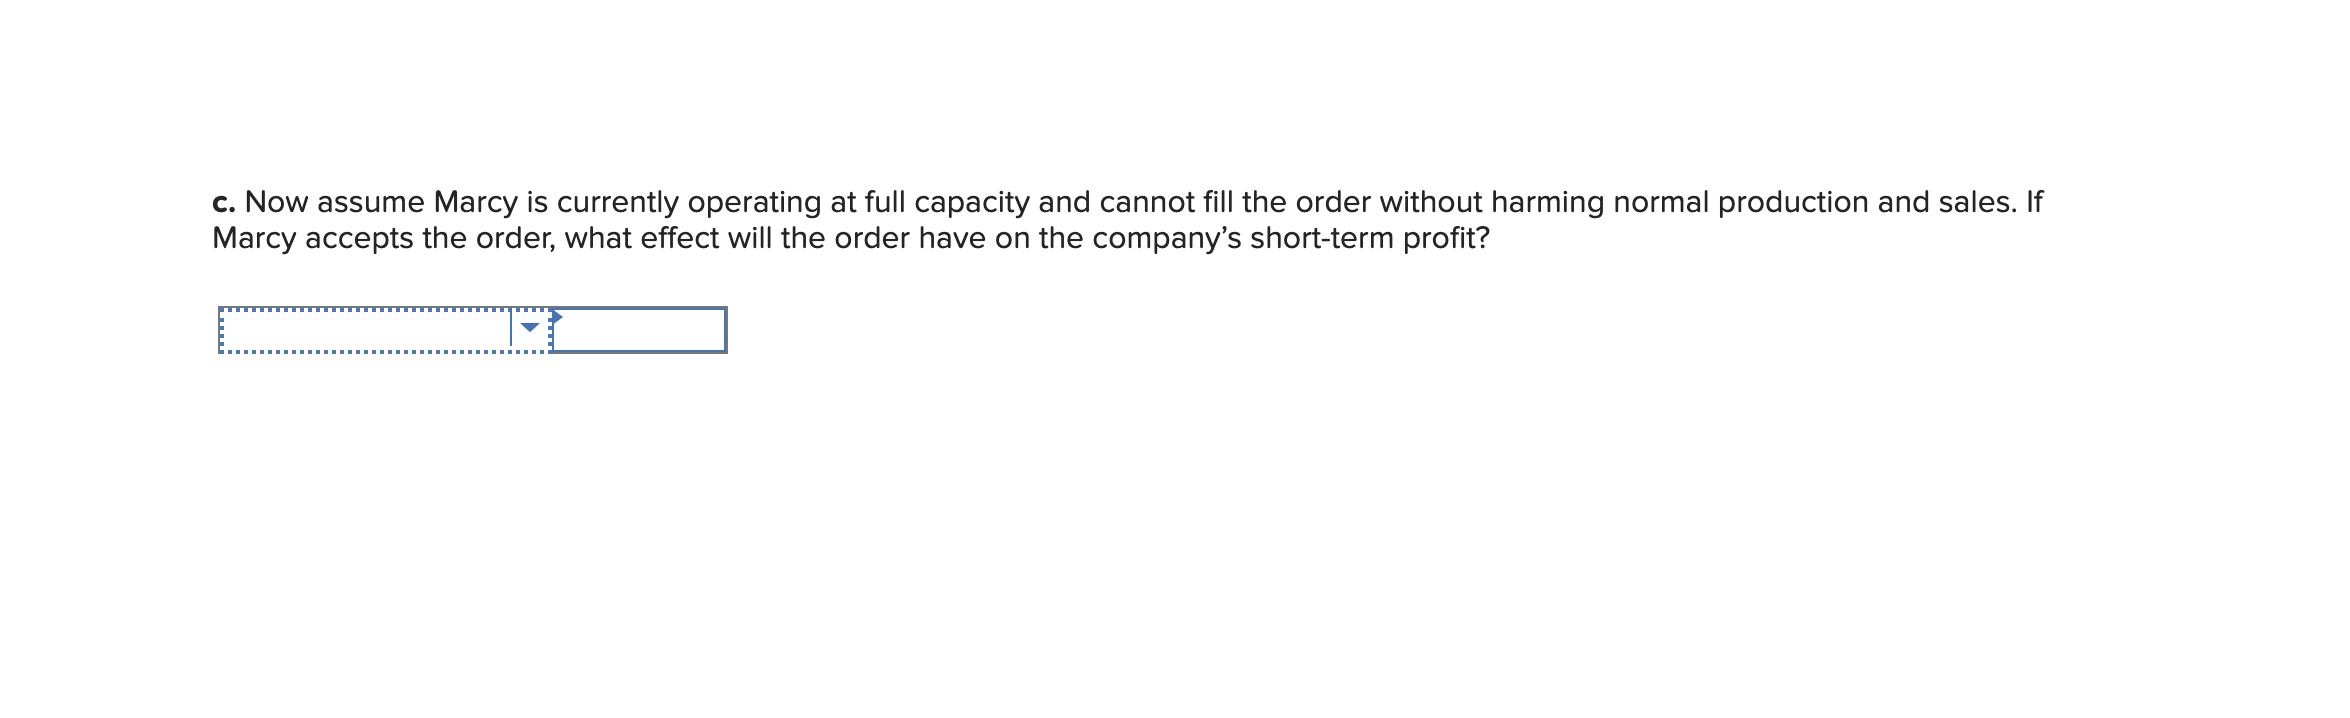 c. Now assume Marcy is currently operating at full capacity and cannot fill the order without harming normal production and sales. If
Marcy accepts the order, what effect will the order have on the company's short-term profit?
